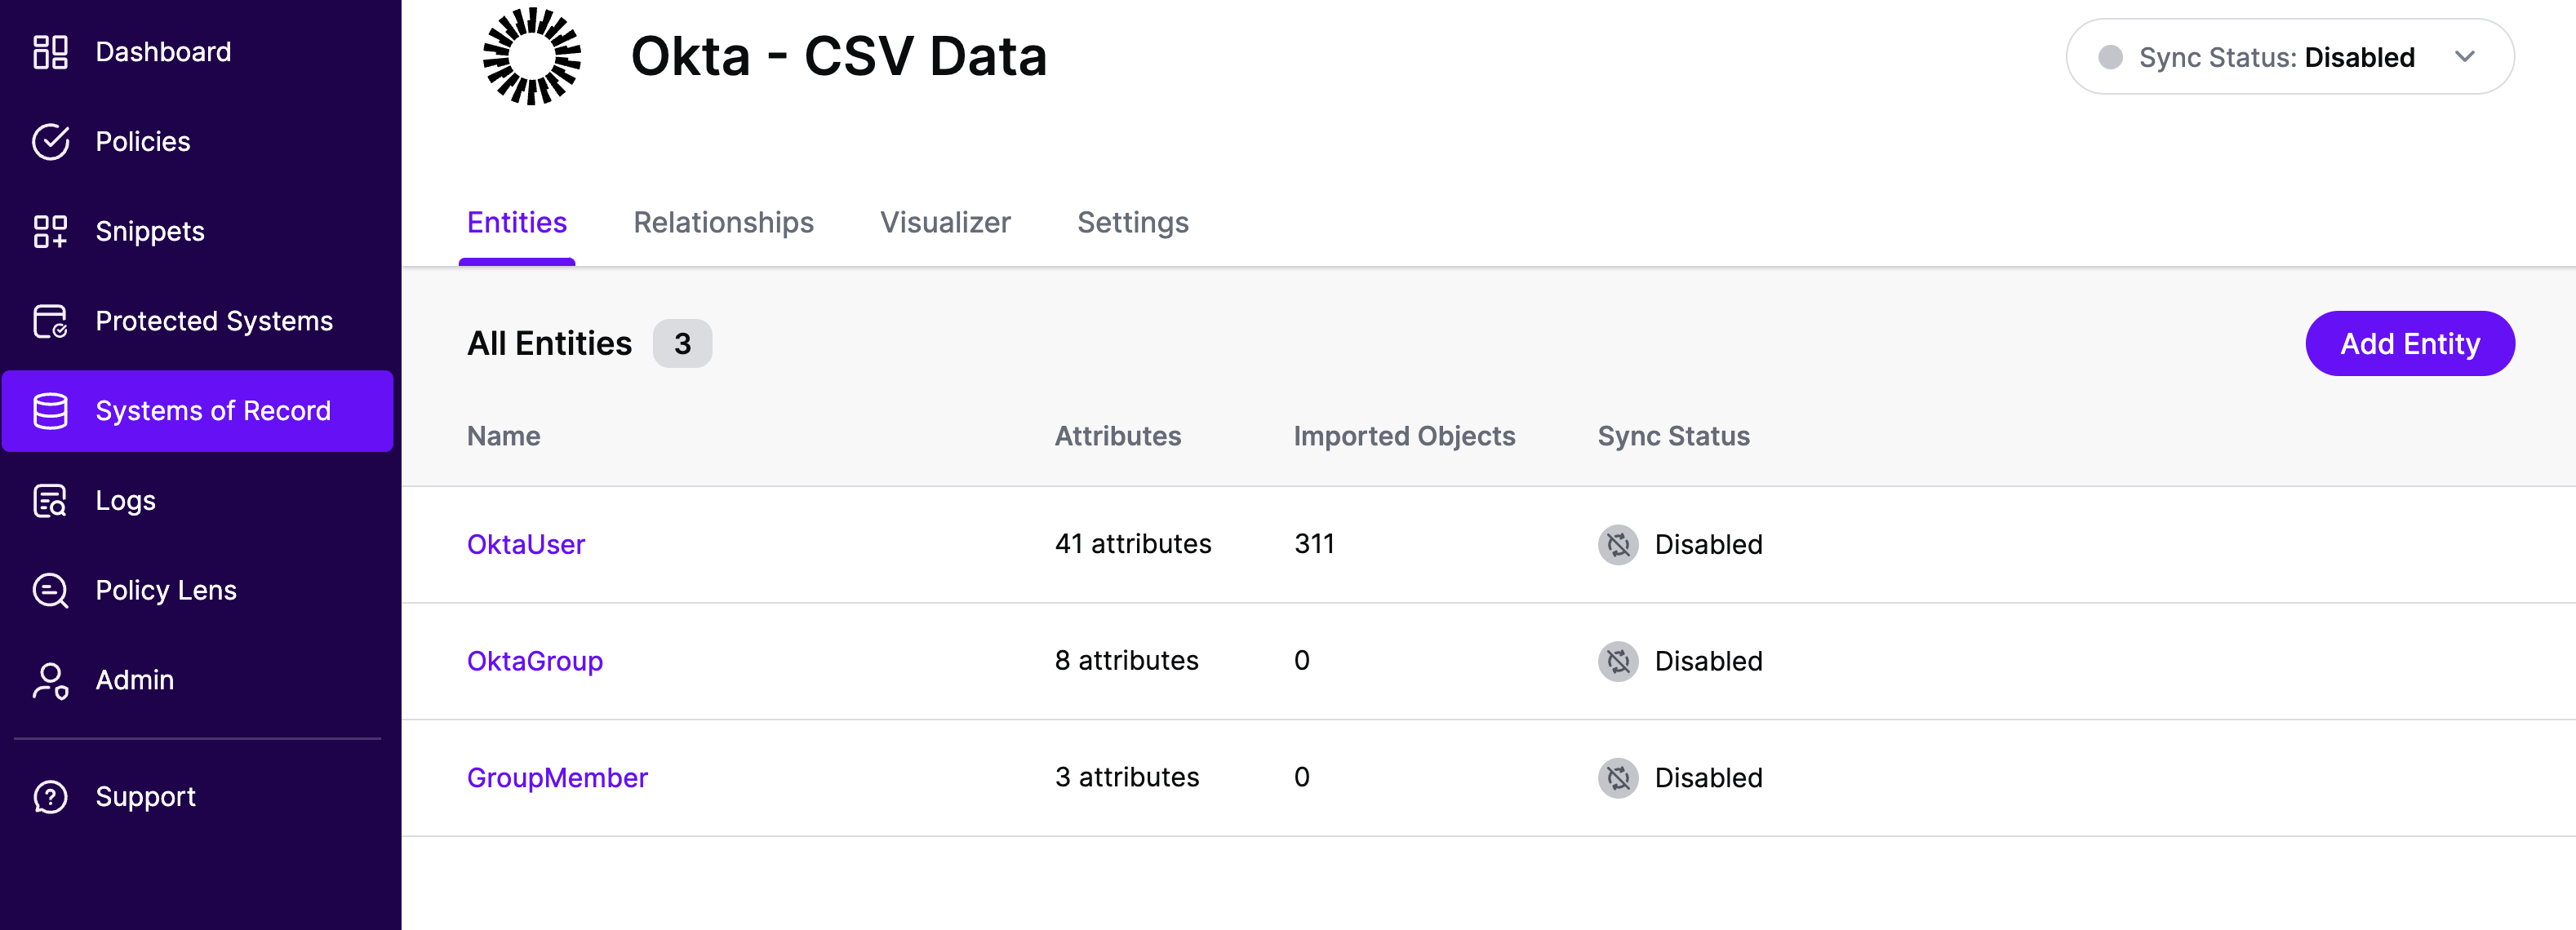 Systems of Record - OktaUser CSV Import Completed Successfully